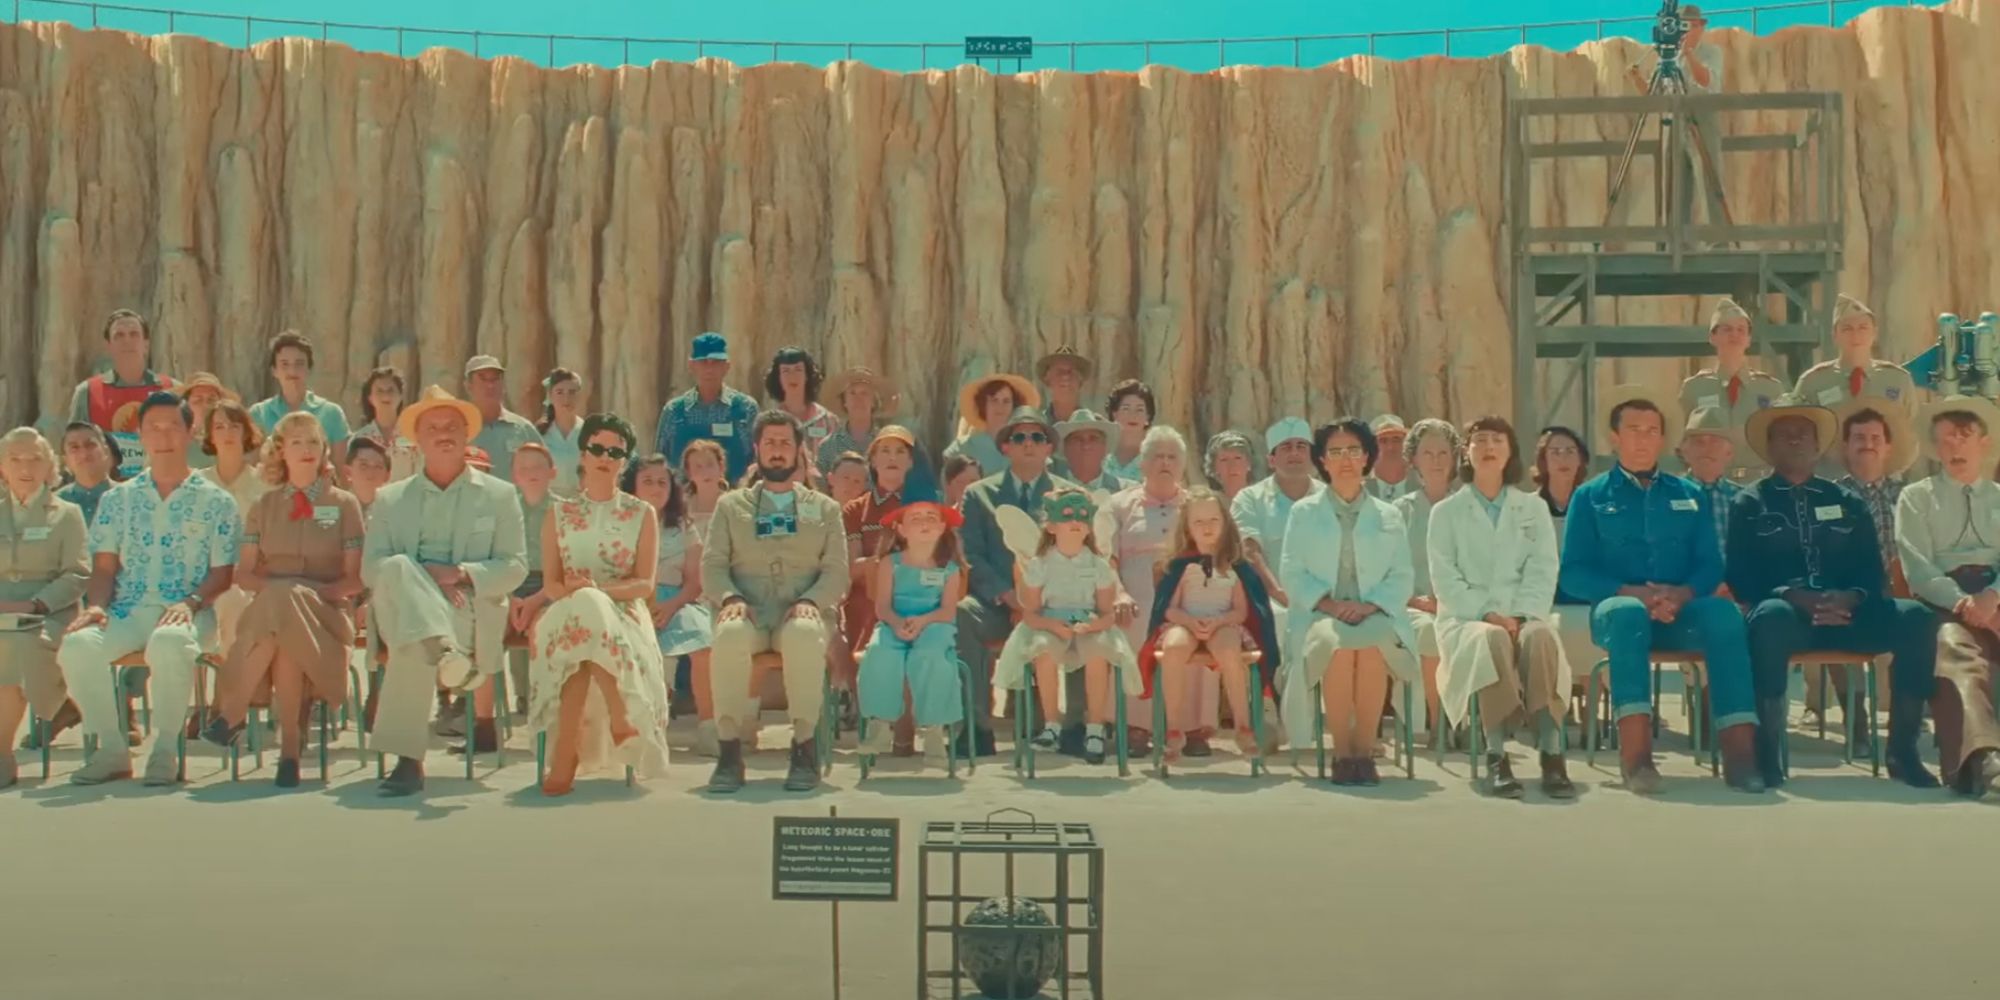 Asteroid City group shot Wes Anderson